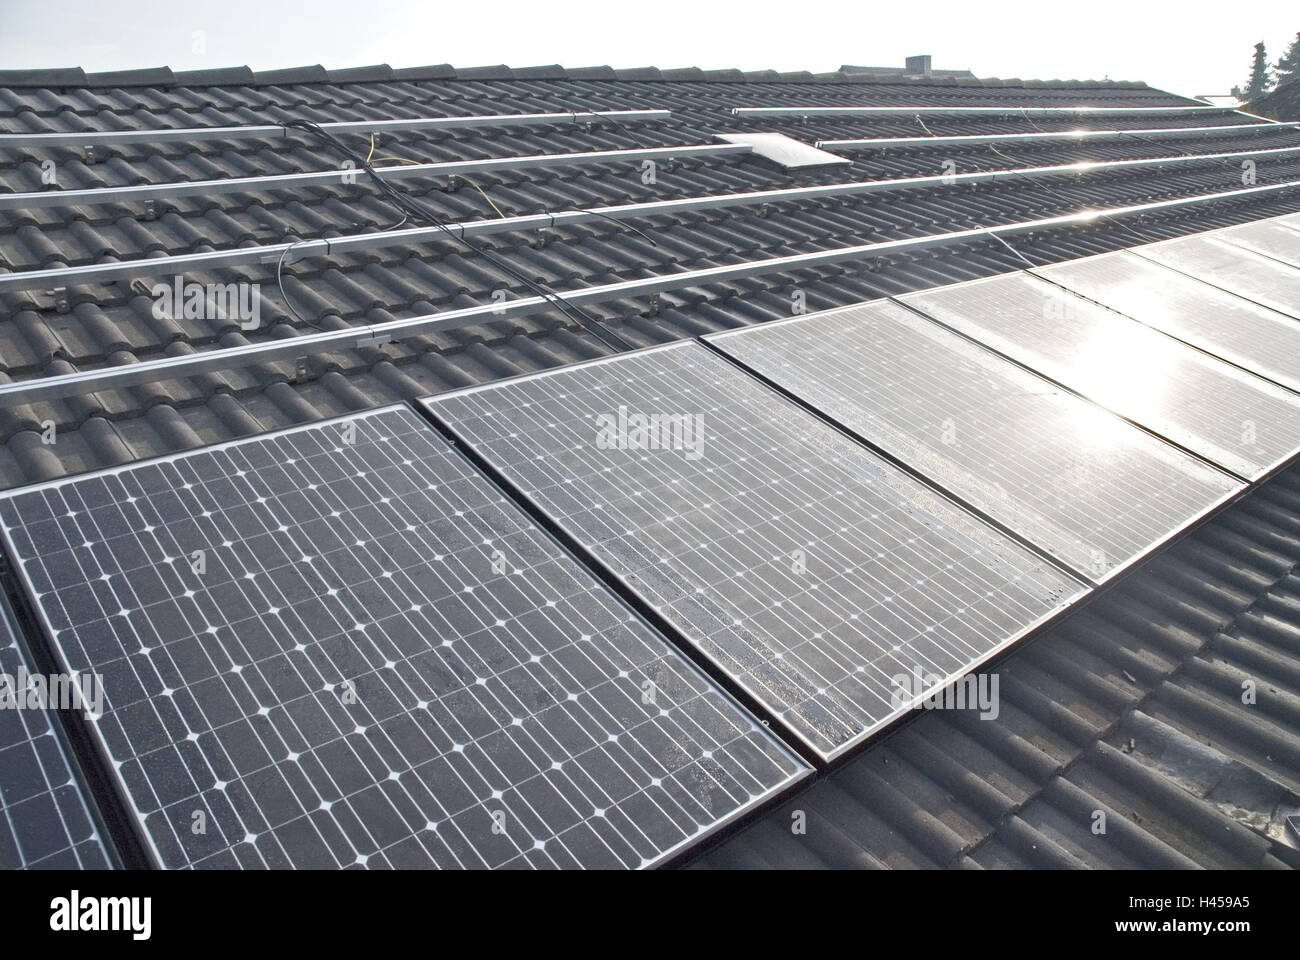 Energy, solar energy, photovoltaics, editing, photovoltaics elements, mountings, roof, Stock Photo